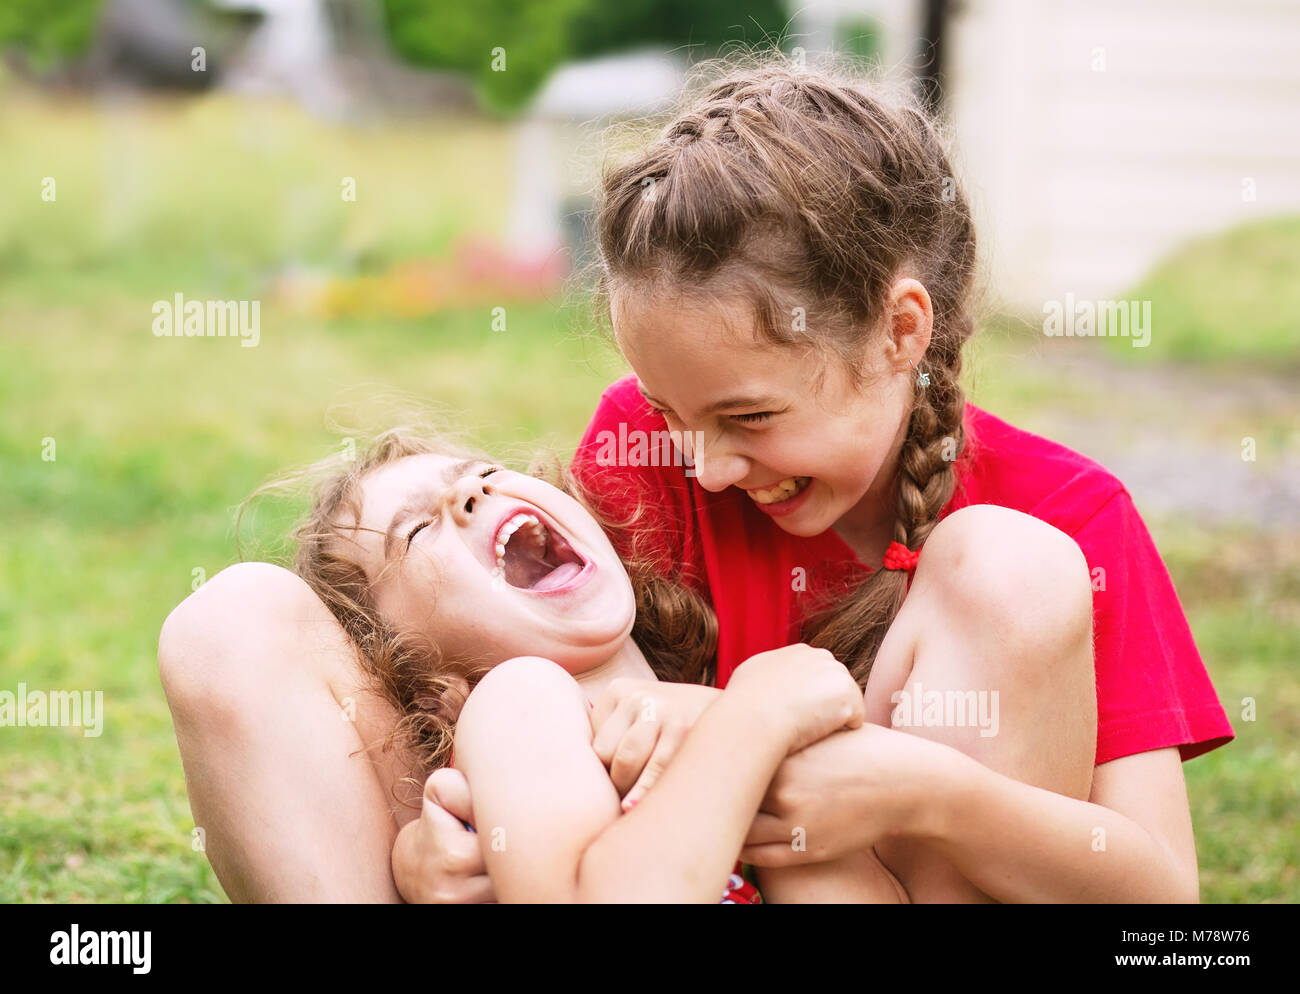 Two Happy little girls embracing and laughing at the park Stock Photo